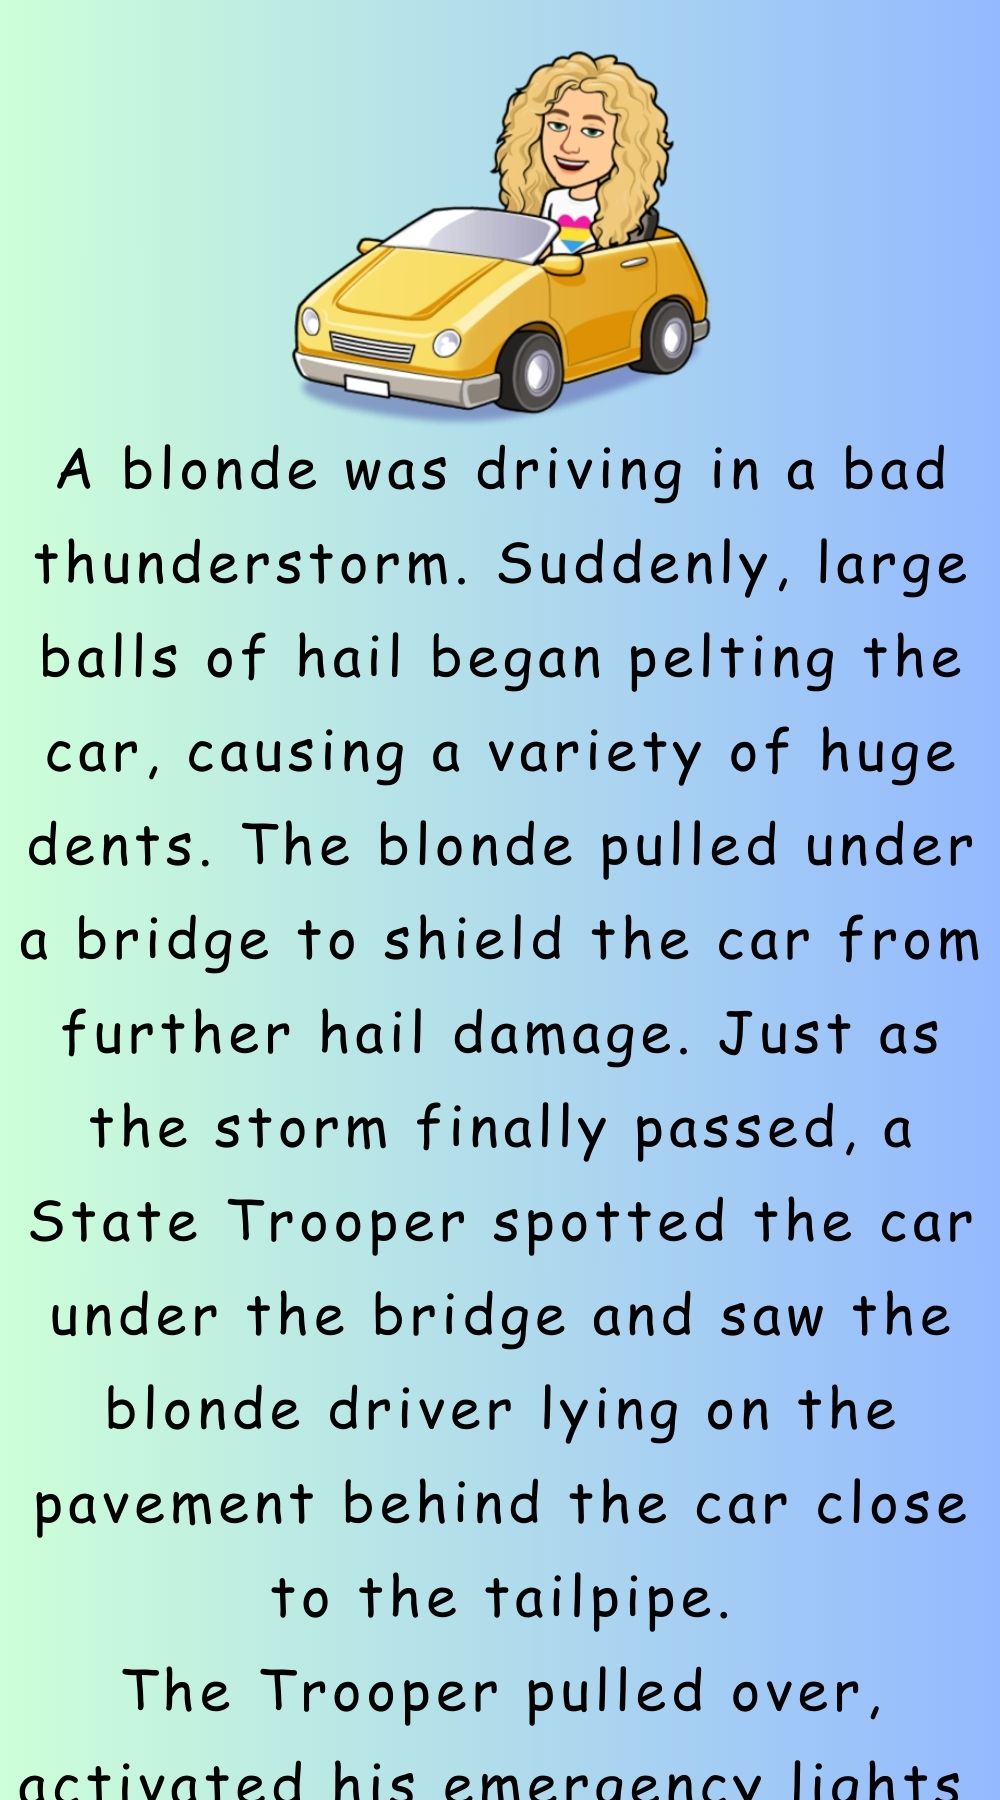 A blonde was driving in a bad thunderstorm